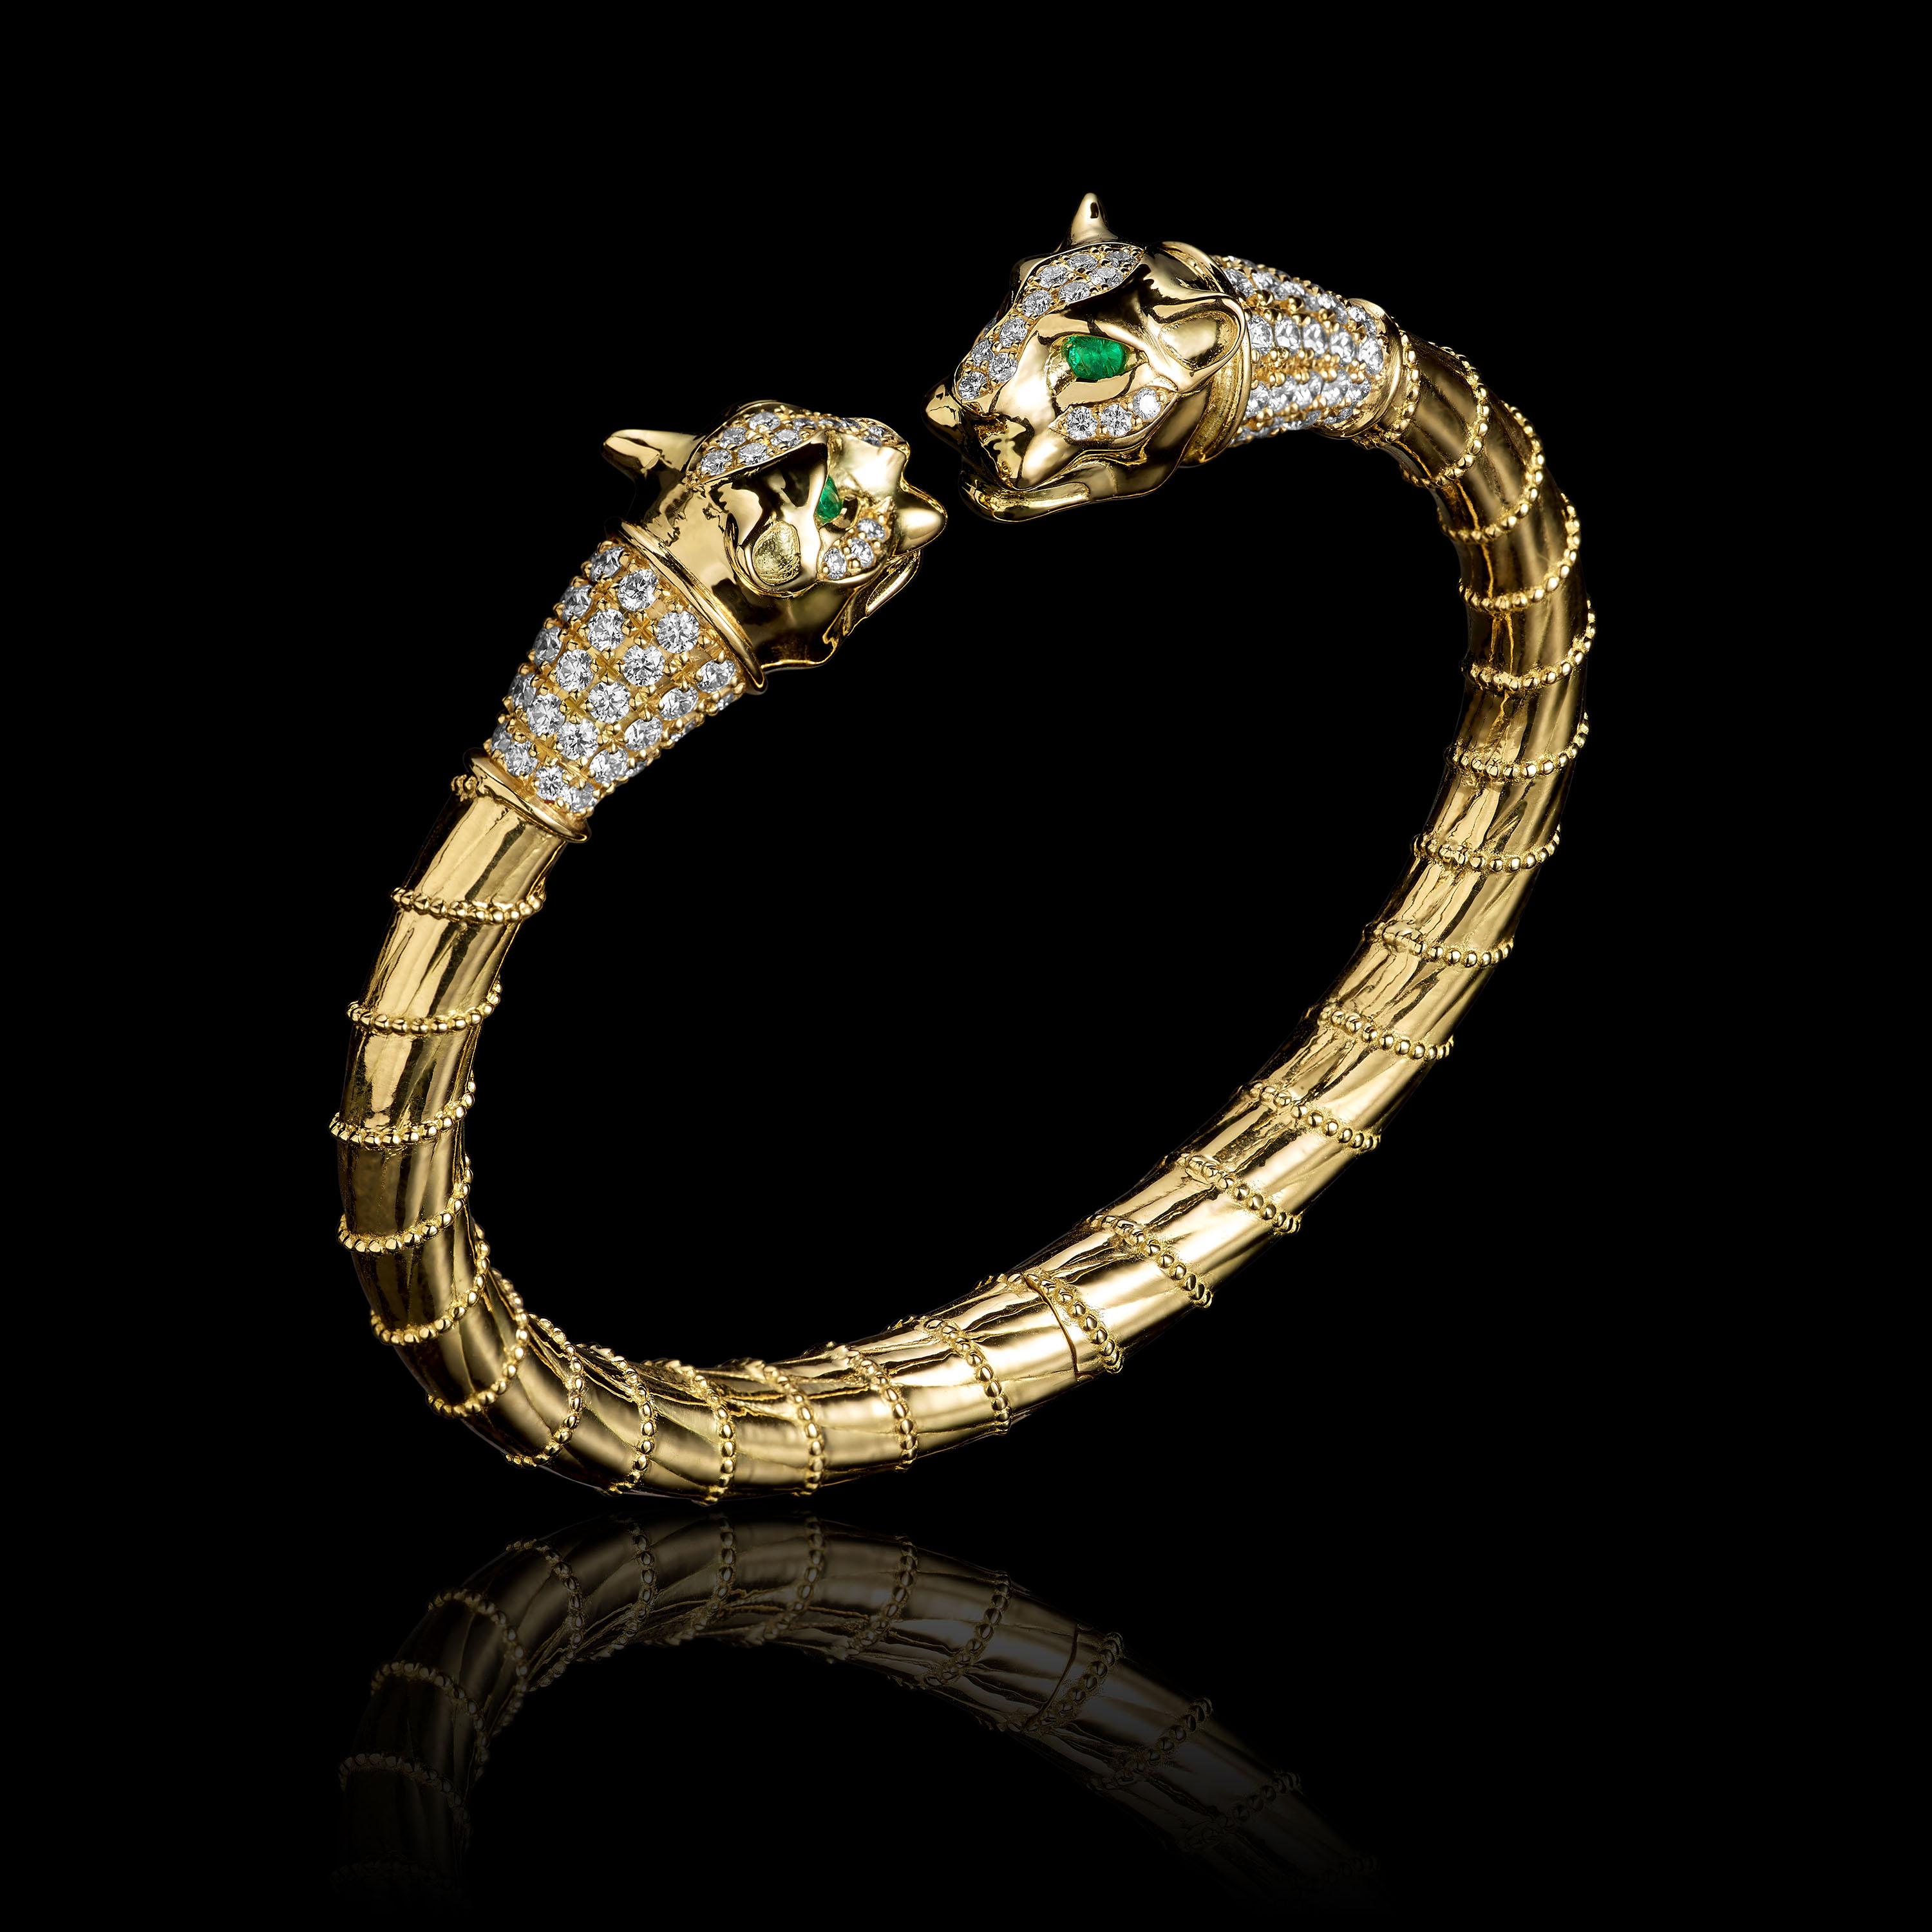 Lioness bracelet in 18K gold, with paved brilliant diamonds, and emeralds eyes. Detailed lioness faces, ornamental gold rope pattern, and hidden spring/hinge mechanism.

This bracelet features two lioness heads with emerald eyes and collars of